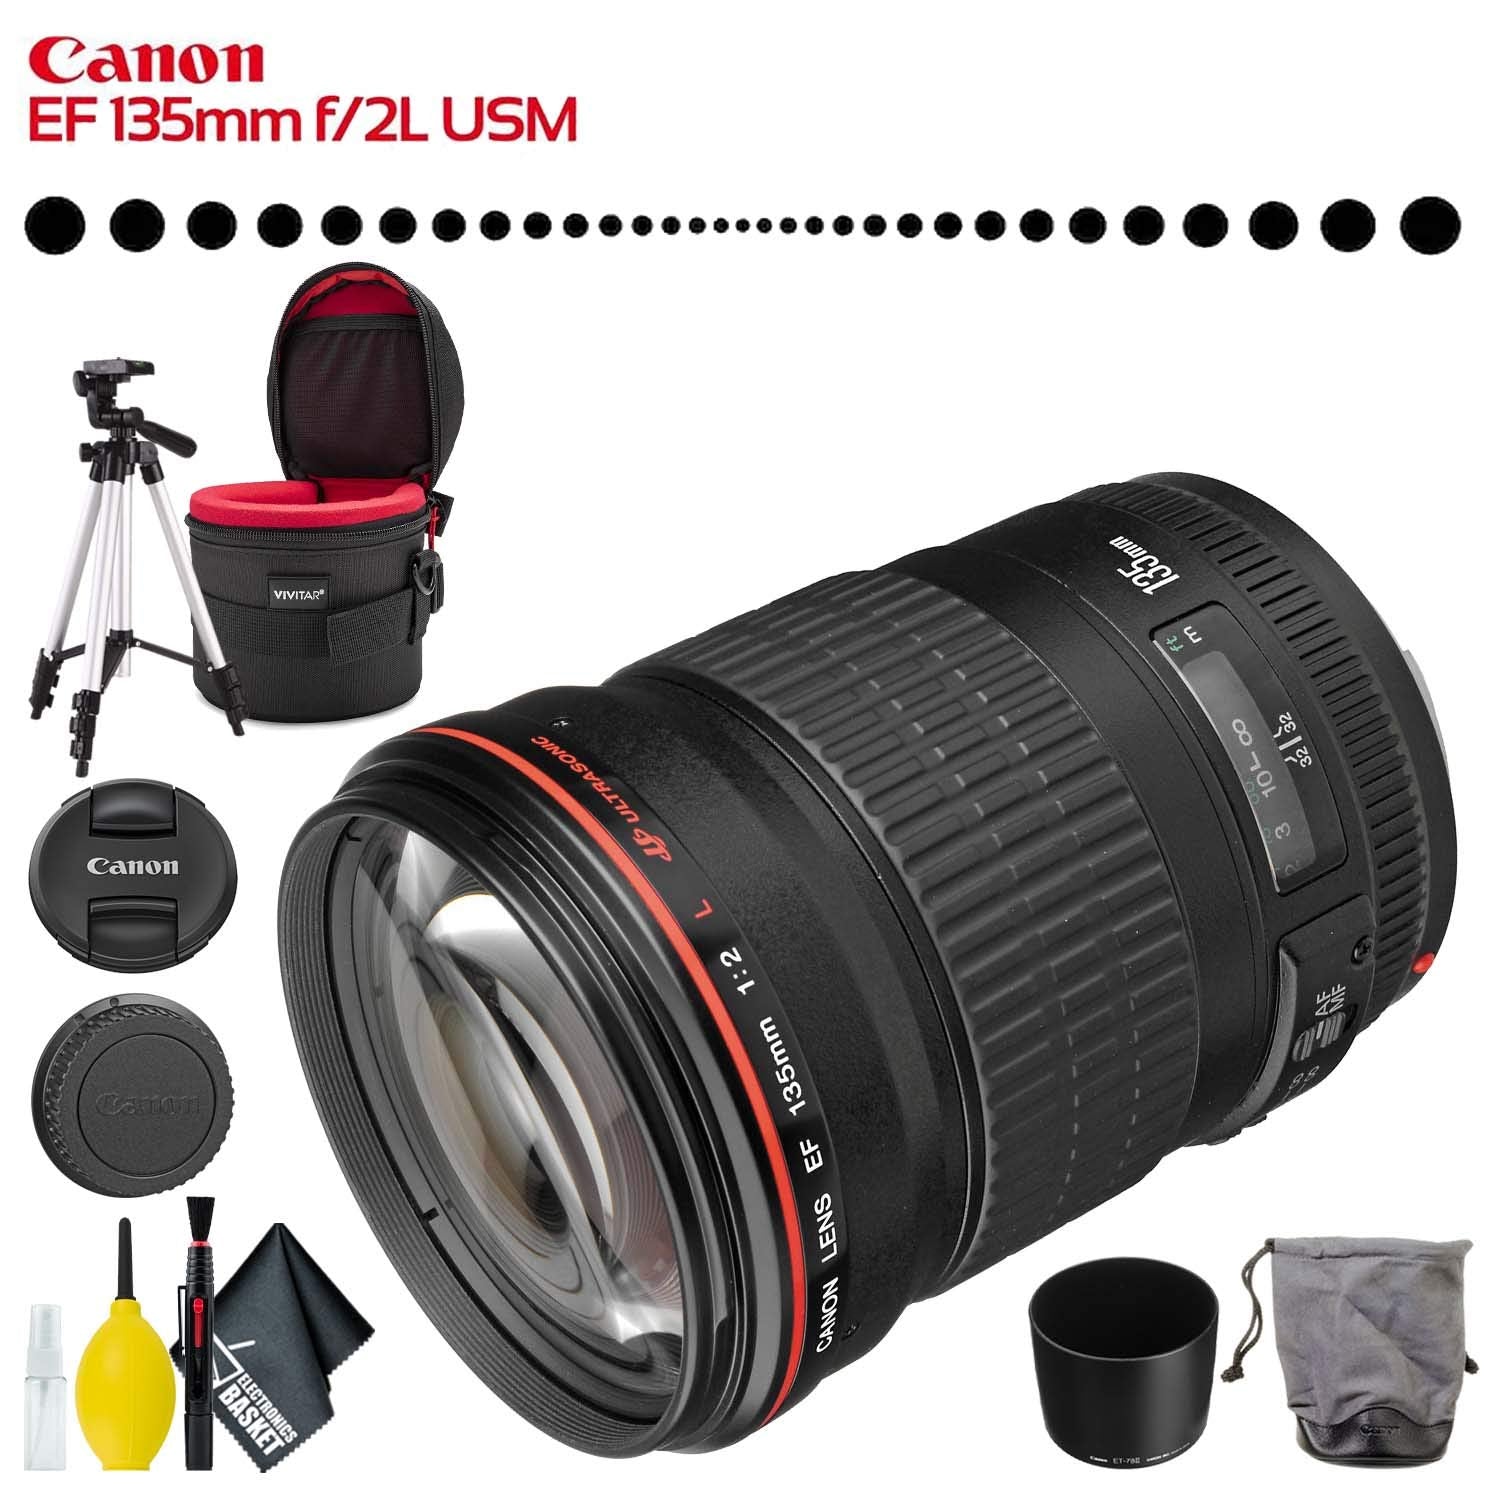 Canon EF 135mm f/2L USM Lens (Intl Model) with Lens Case, Tripod and Cleaning Kit